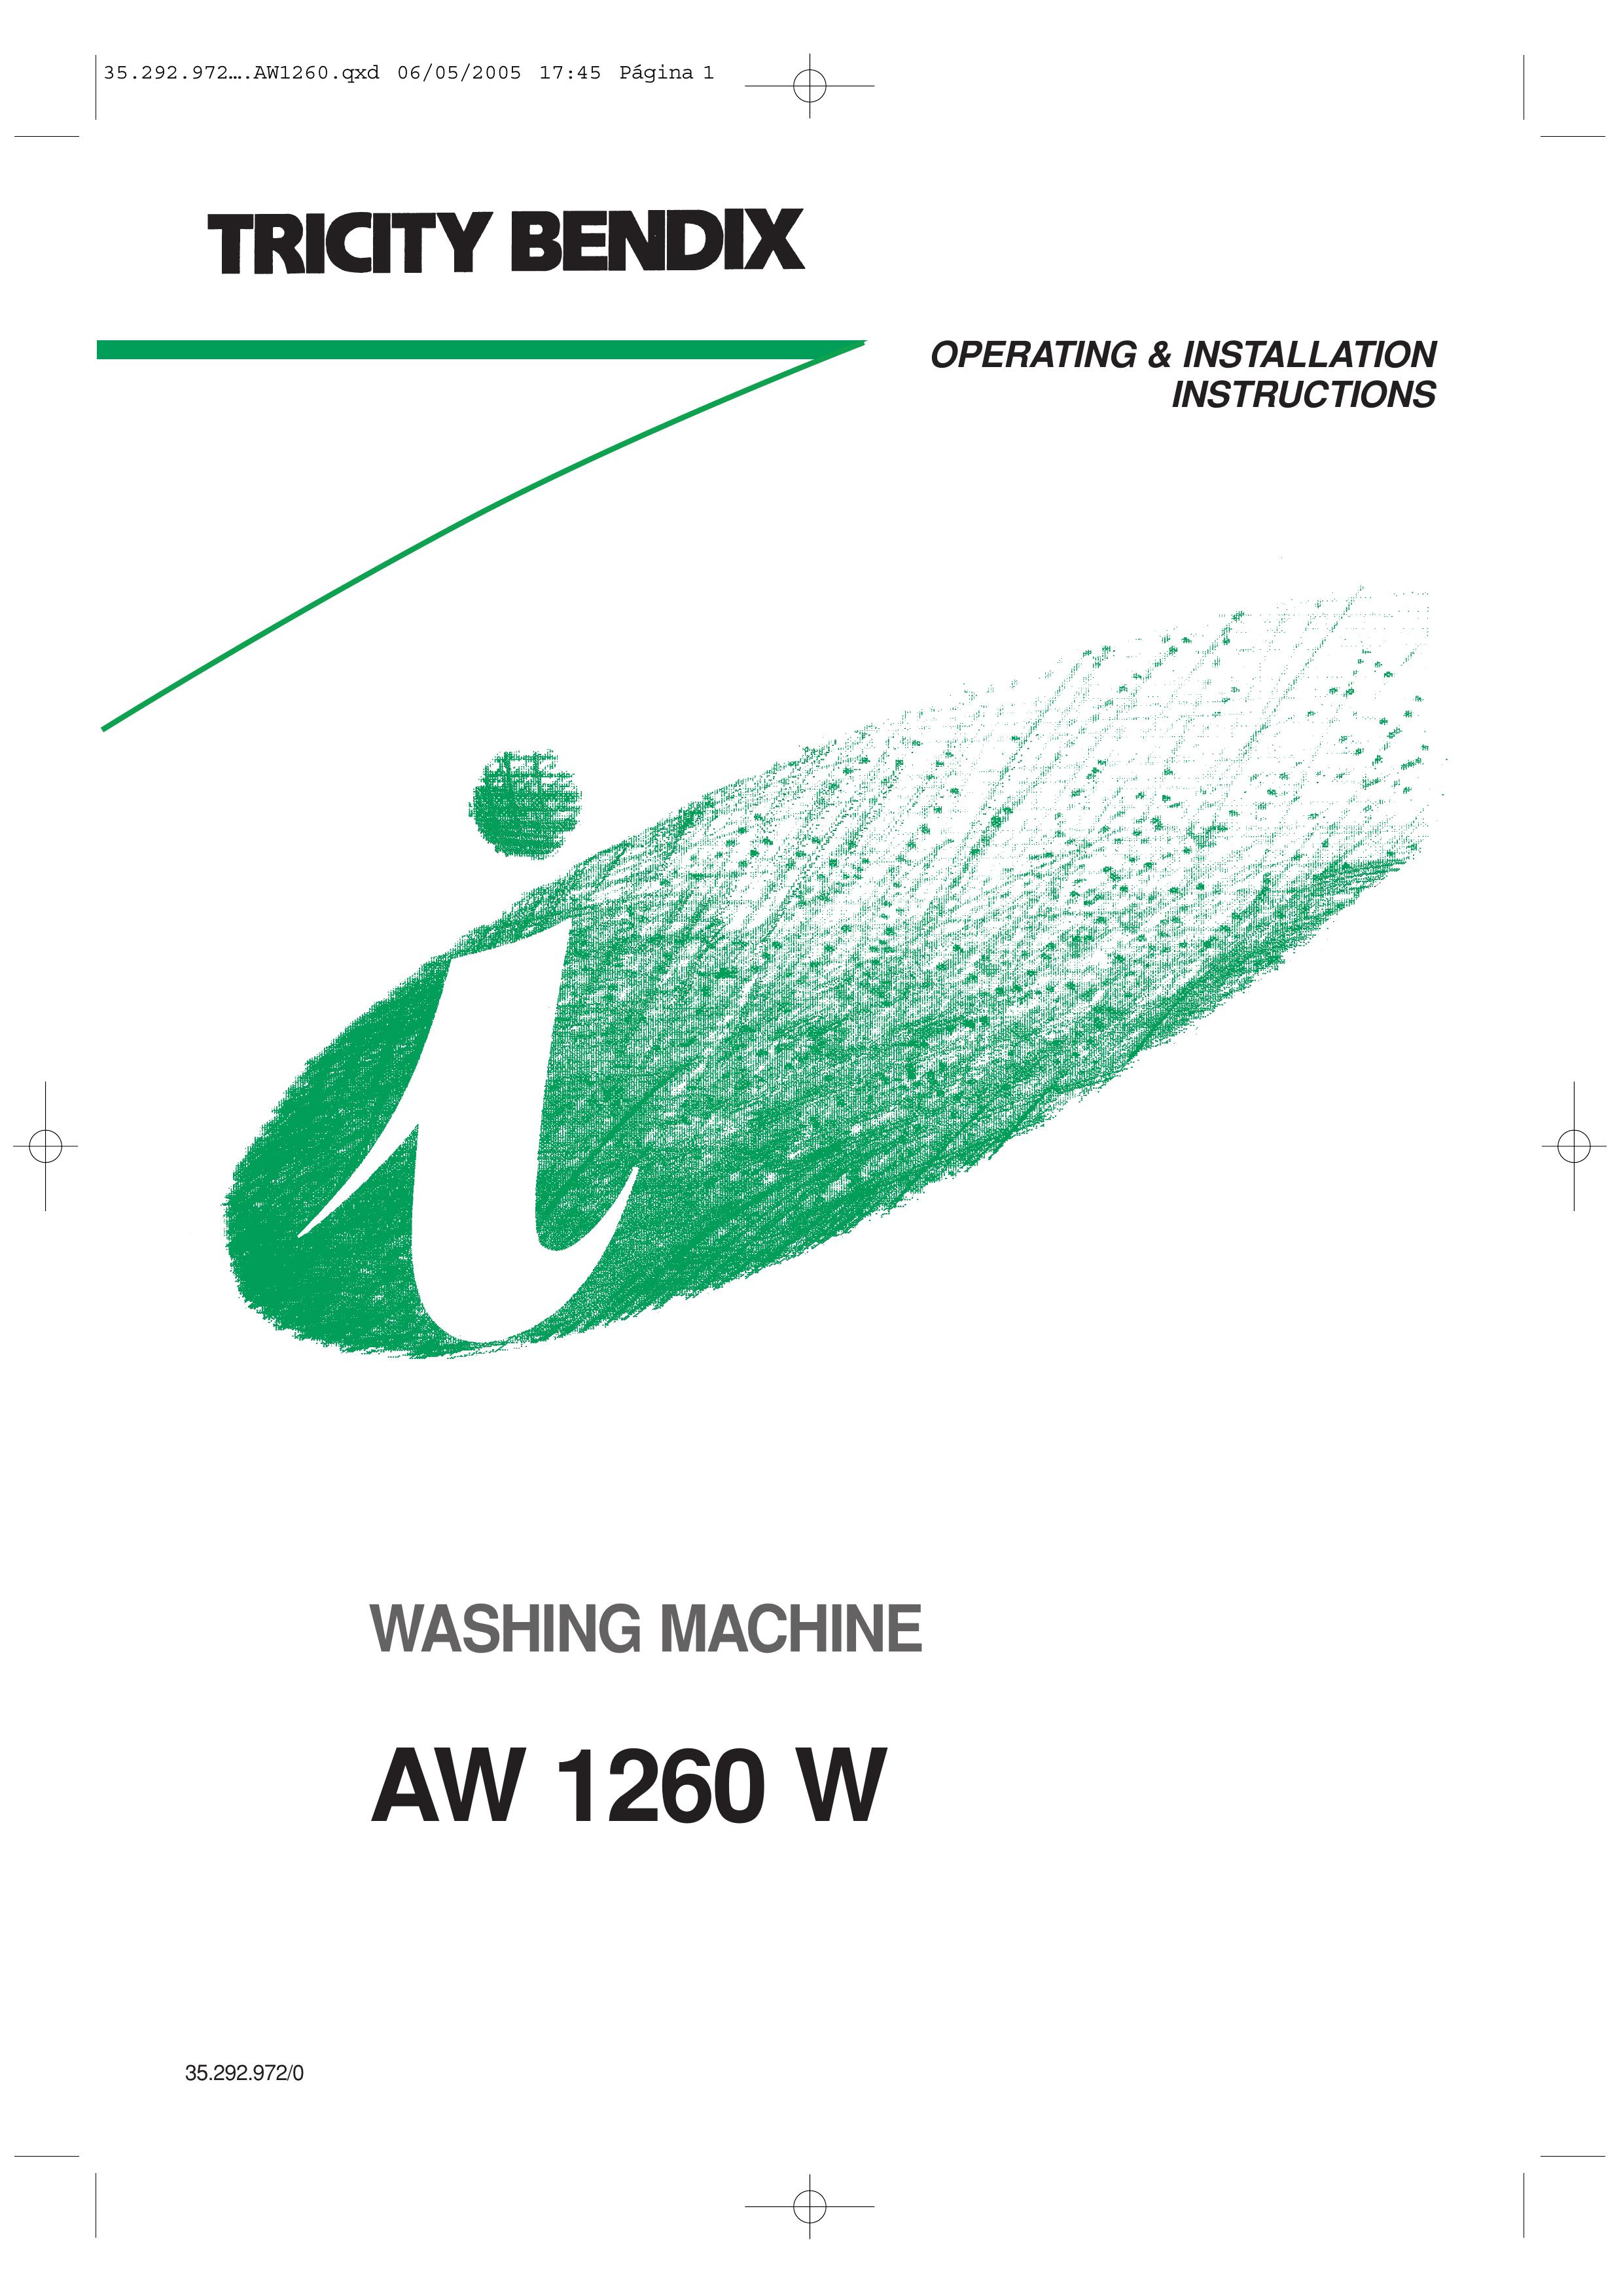 Tricity Bendix AW 1260 W Washer/Dryer User Manual